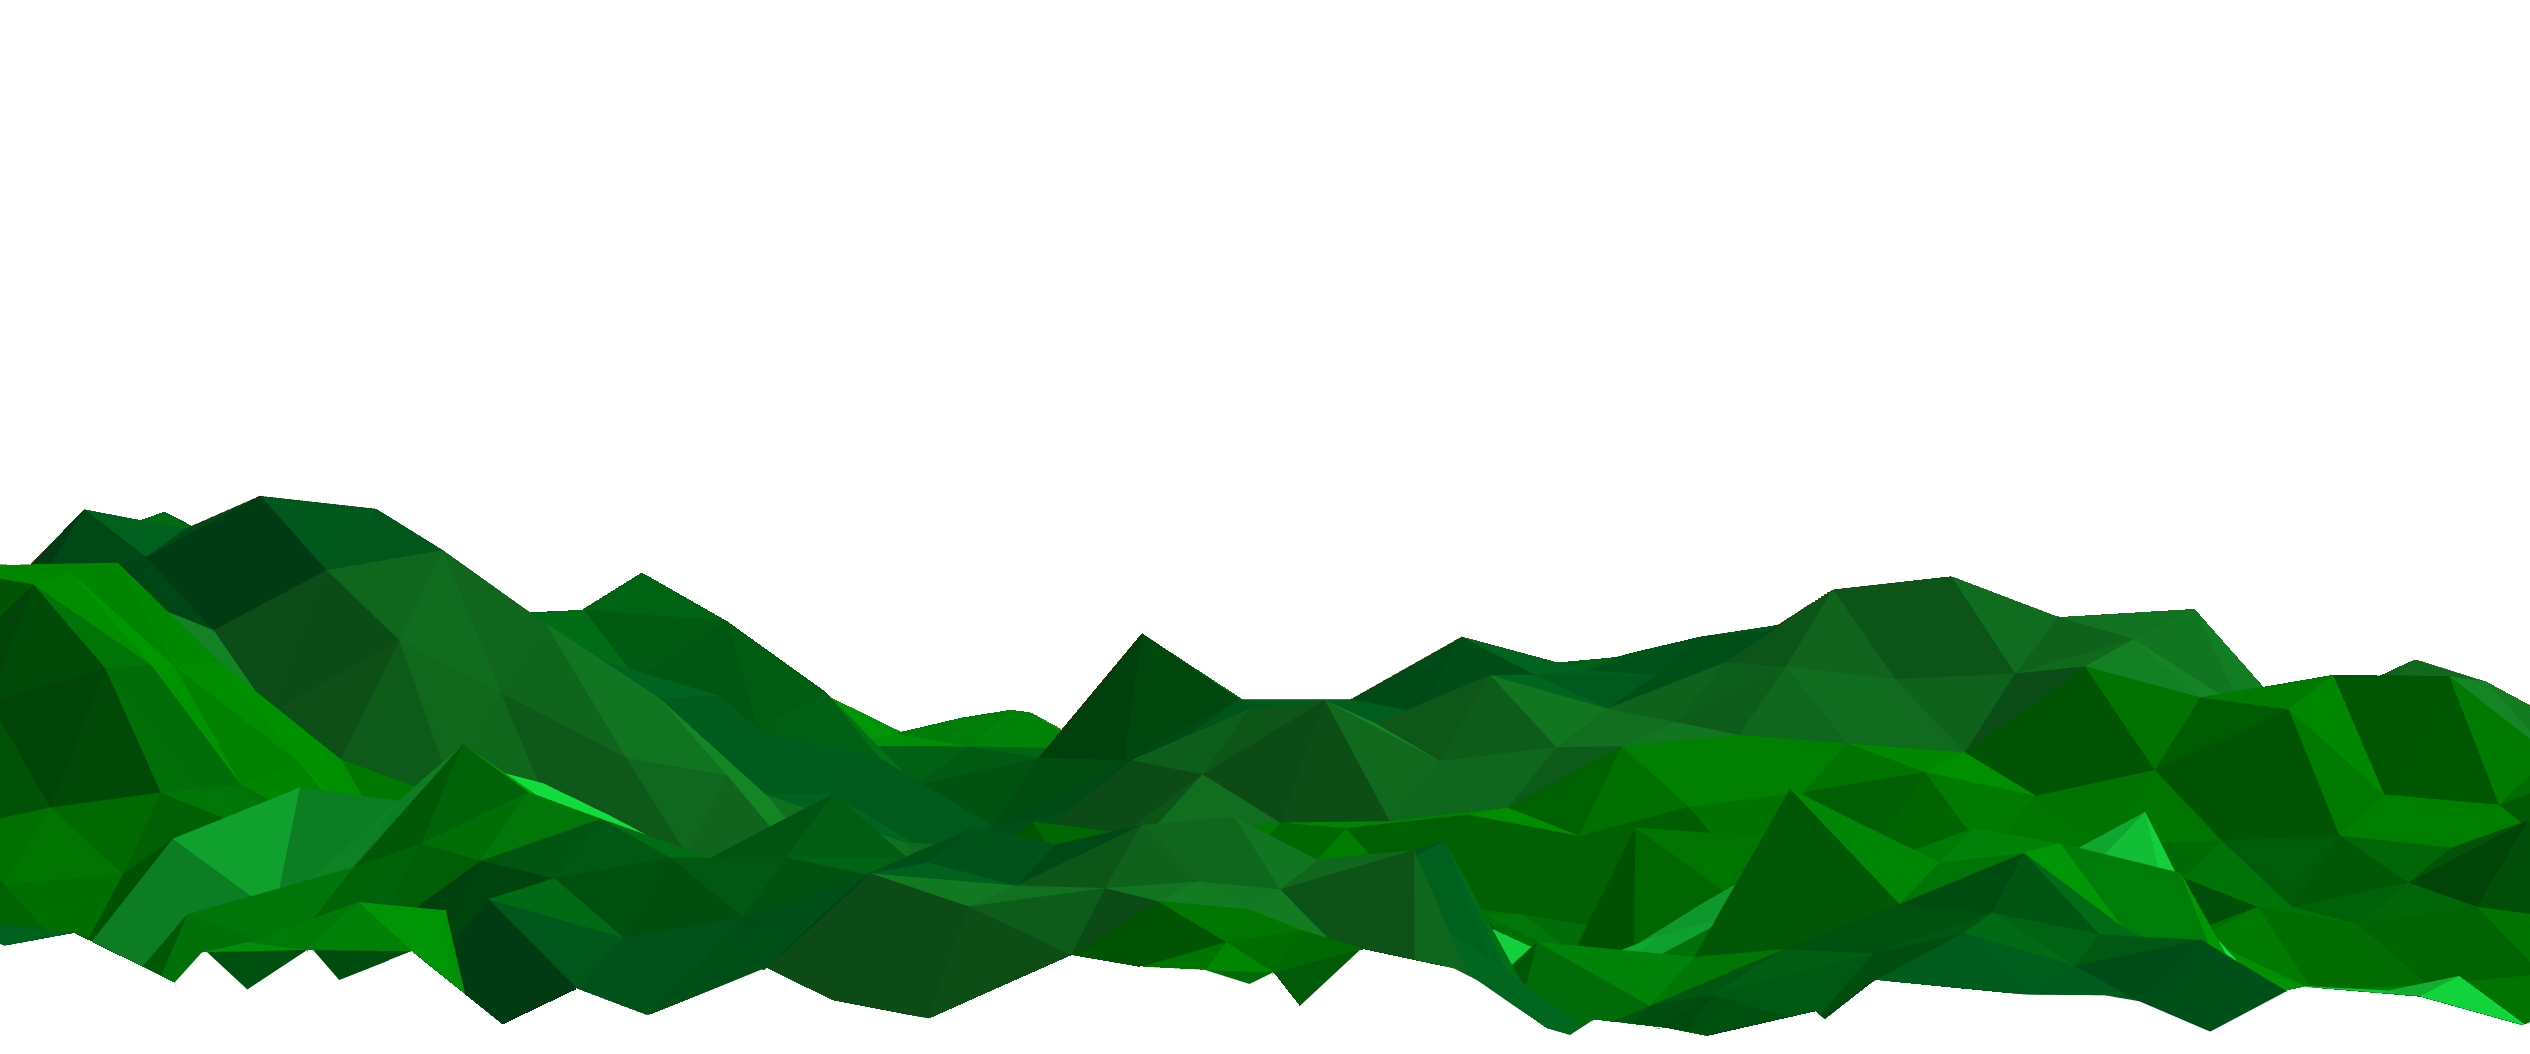 mountain image for banner